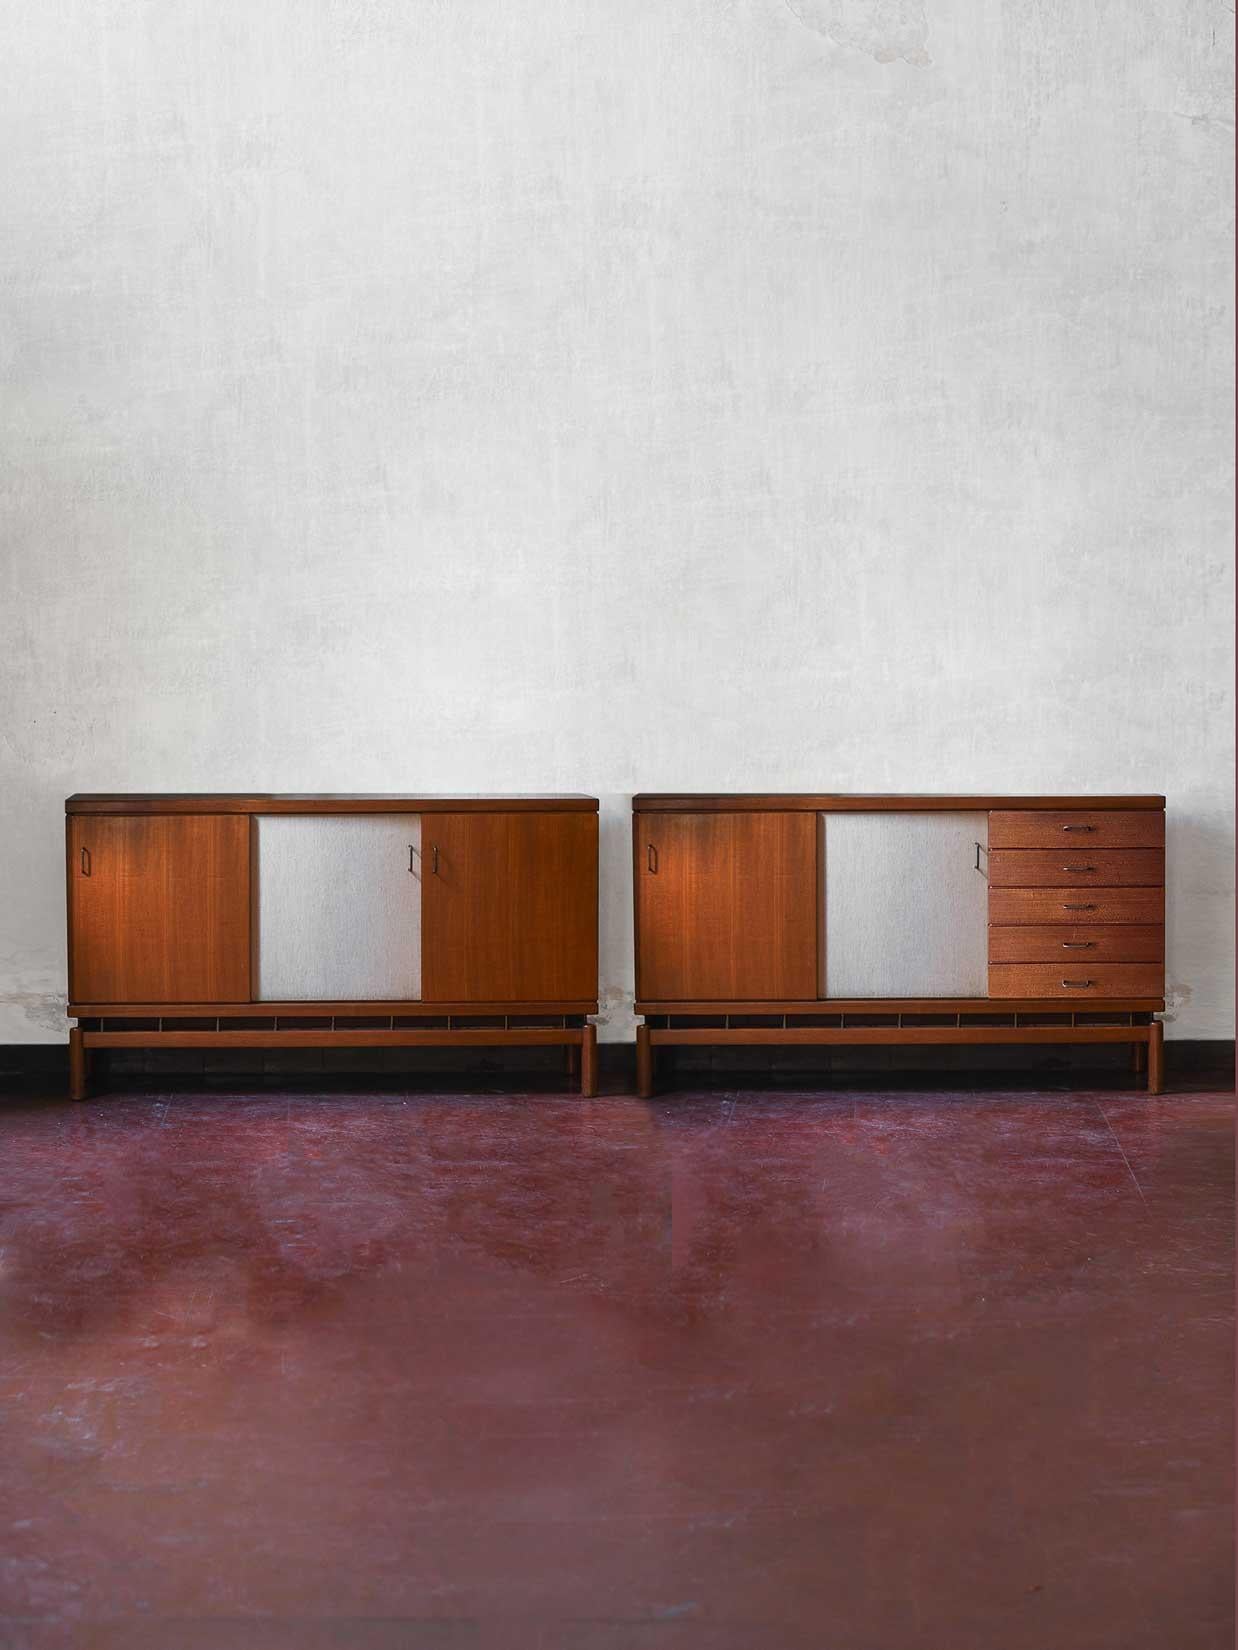 Pair of teak sideboards “La Permanente Mobili Cantù” with brass and fabric details by Ilmari Tapiovaara.
1 Storage unit with sliding doors and internal shelves
1 Storage unit with sliding doors, internal shelves and drawers.
Sold as set of 2.